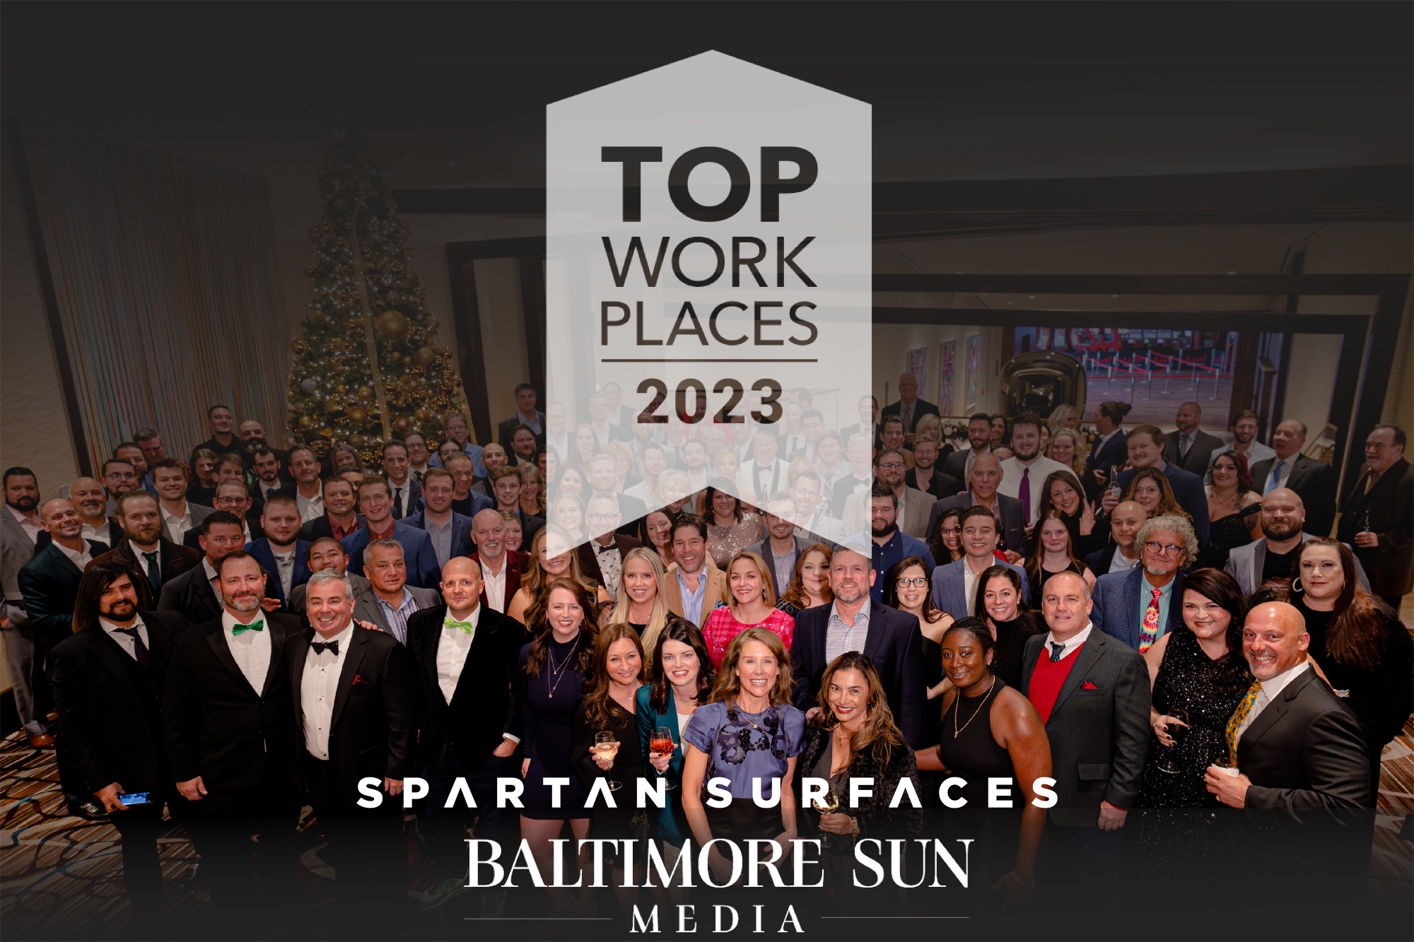 Top Work Places 2023 Cover Image 2k.png